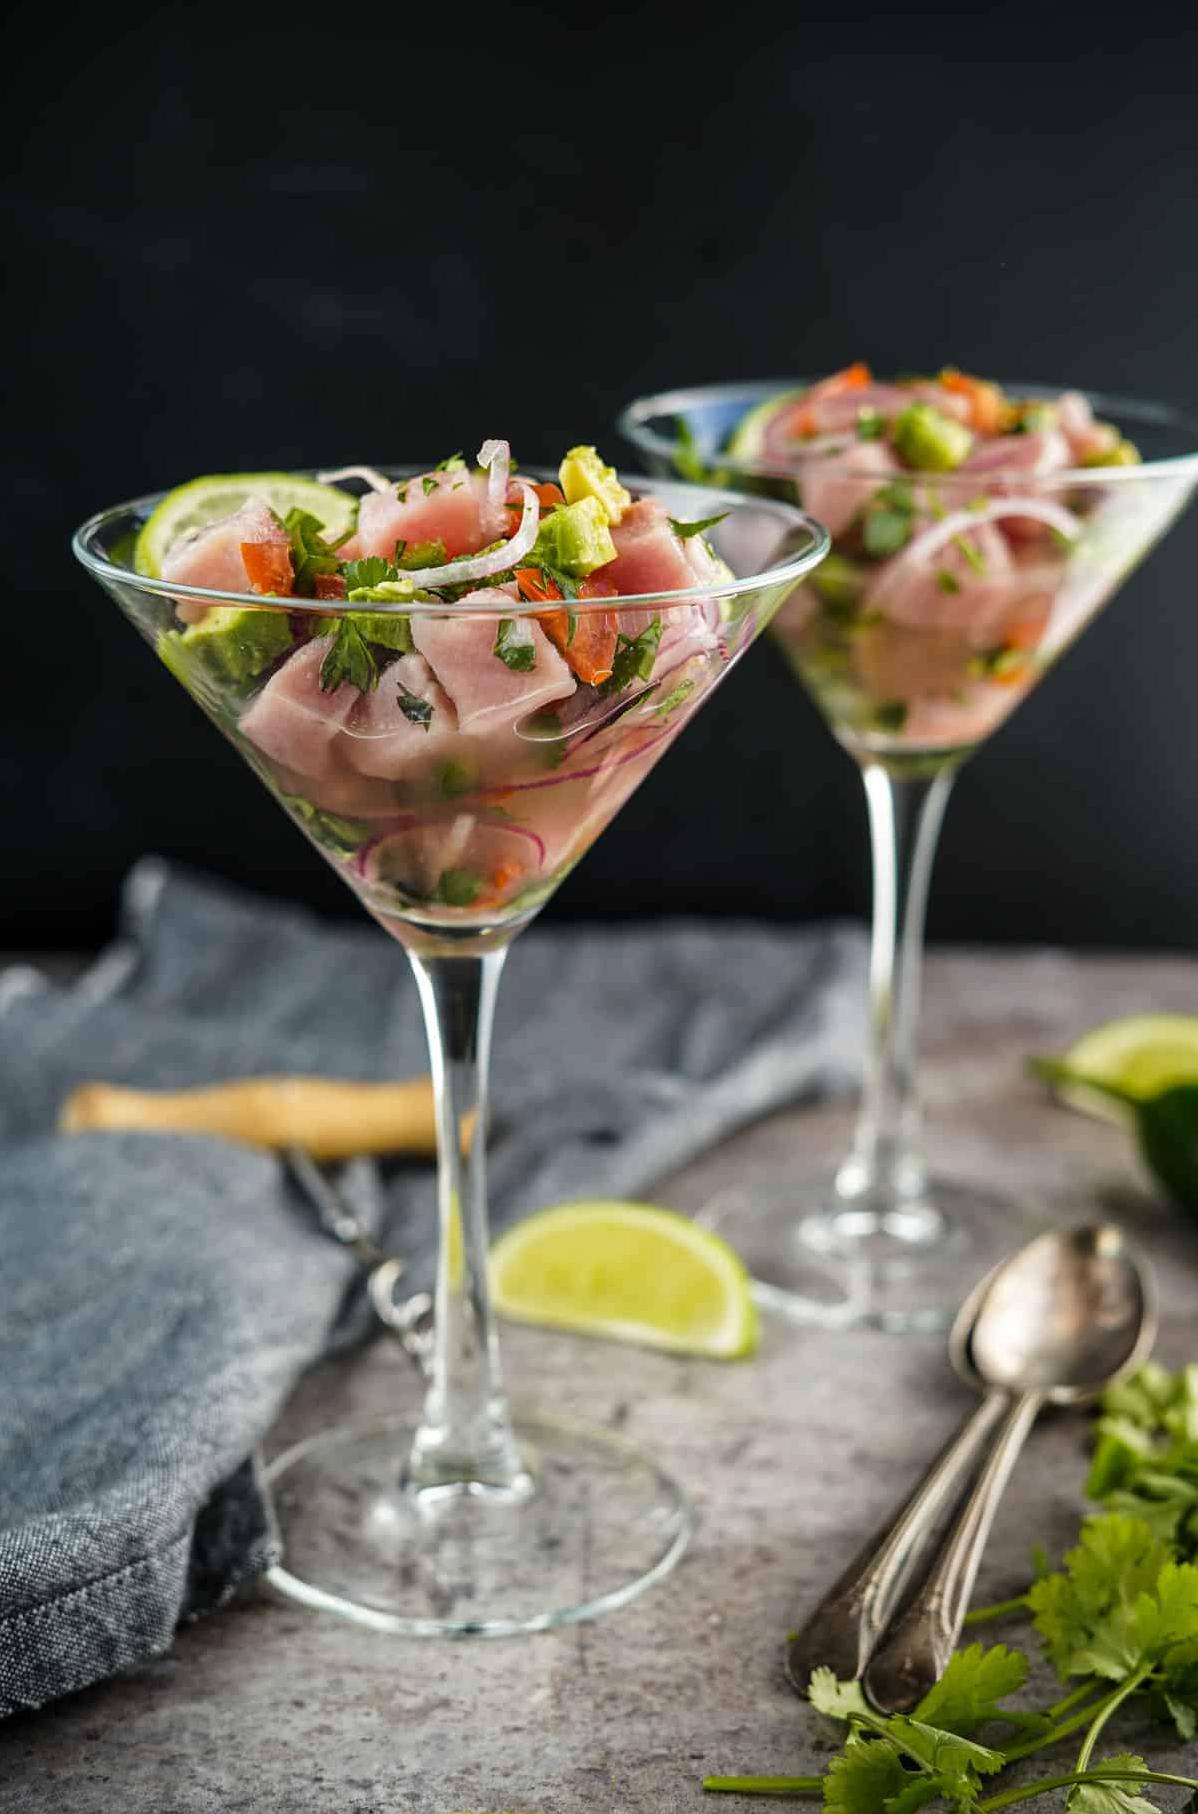  Hear the waves and taste the sea with our Ahi and Shrimp Ceviche with Rum.